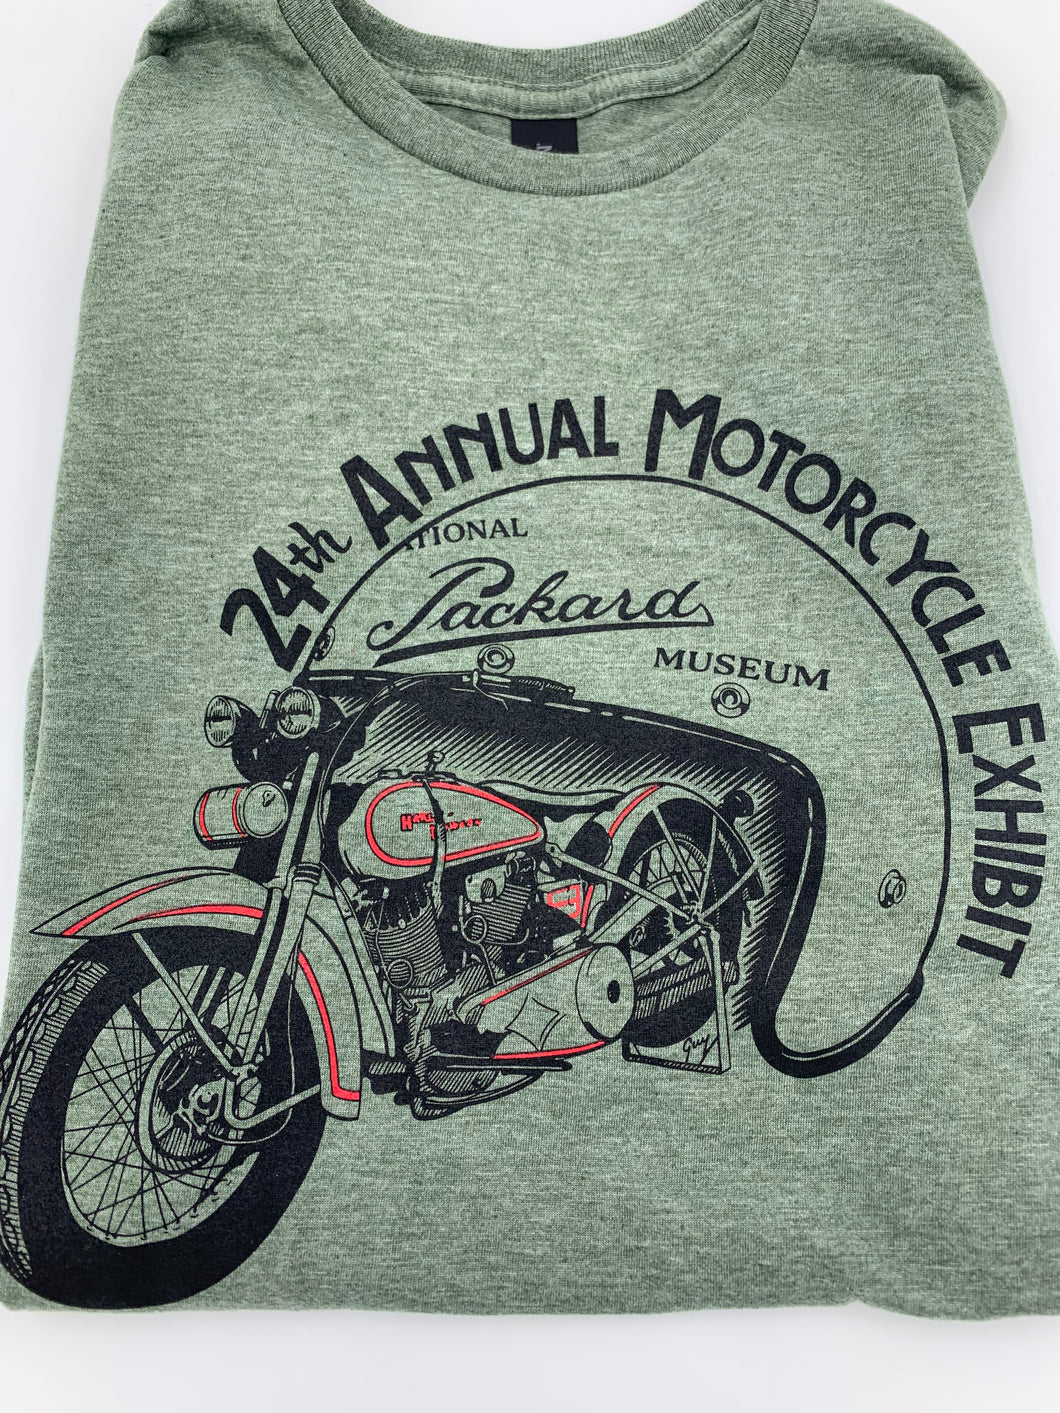 24th Annual Motorcycle Exhibit T-Shirts